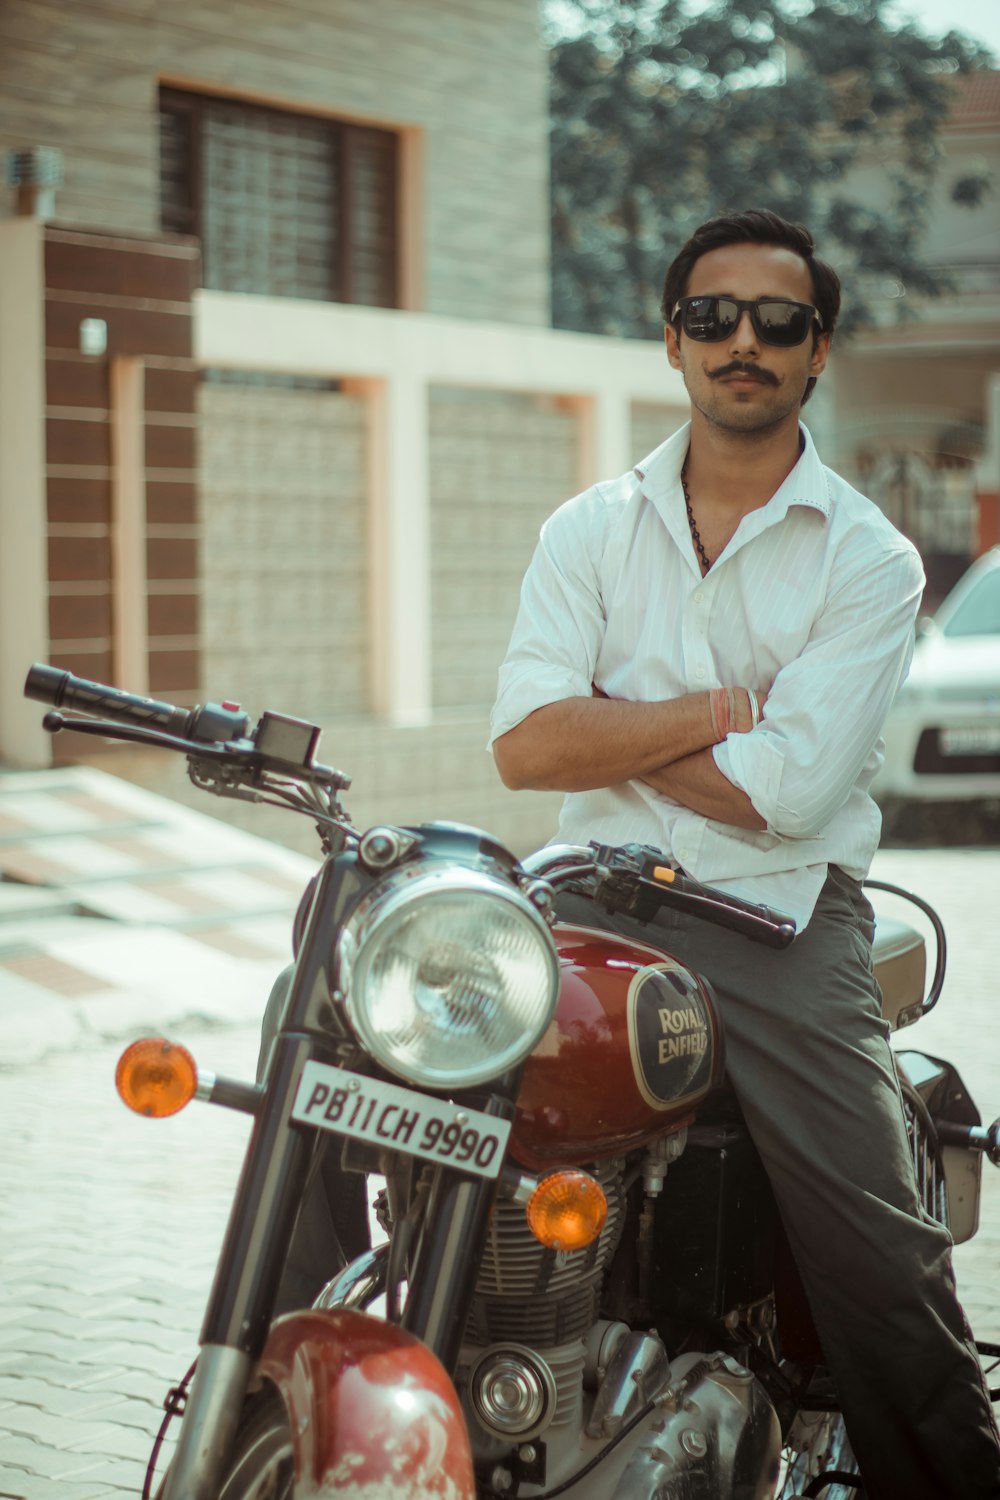 man in white button up shirt riding red and black motorcycle